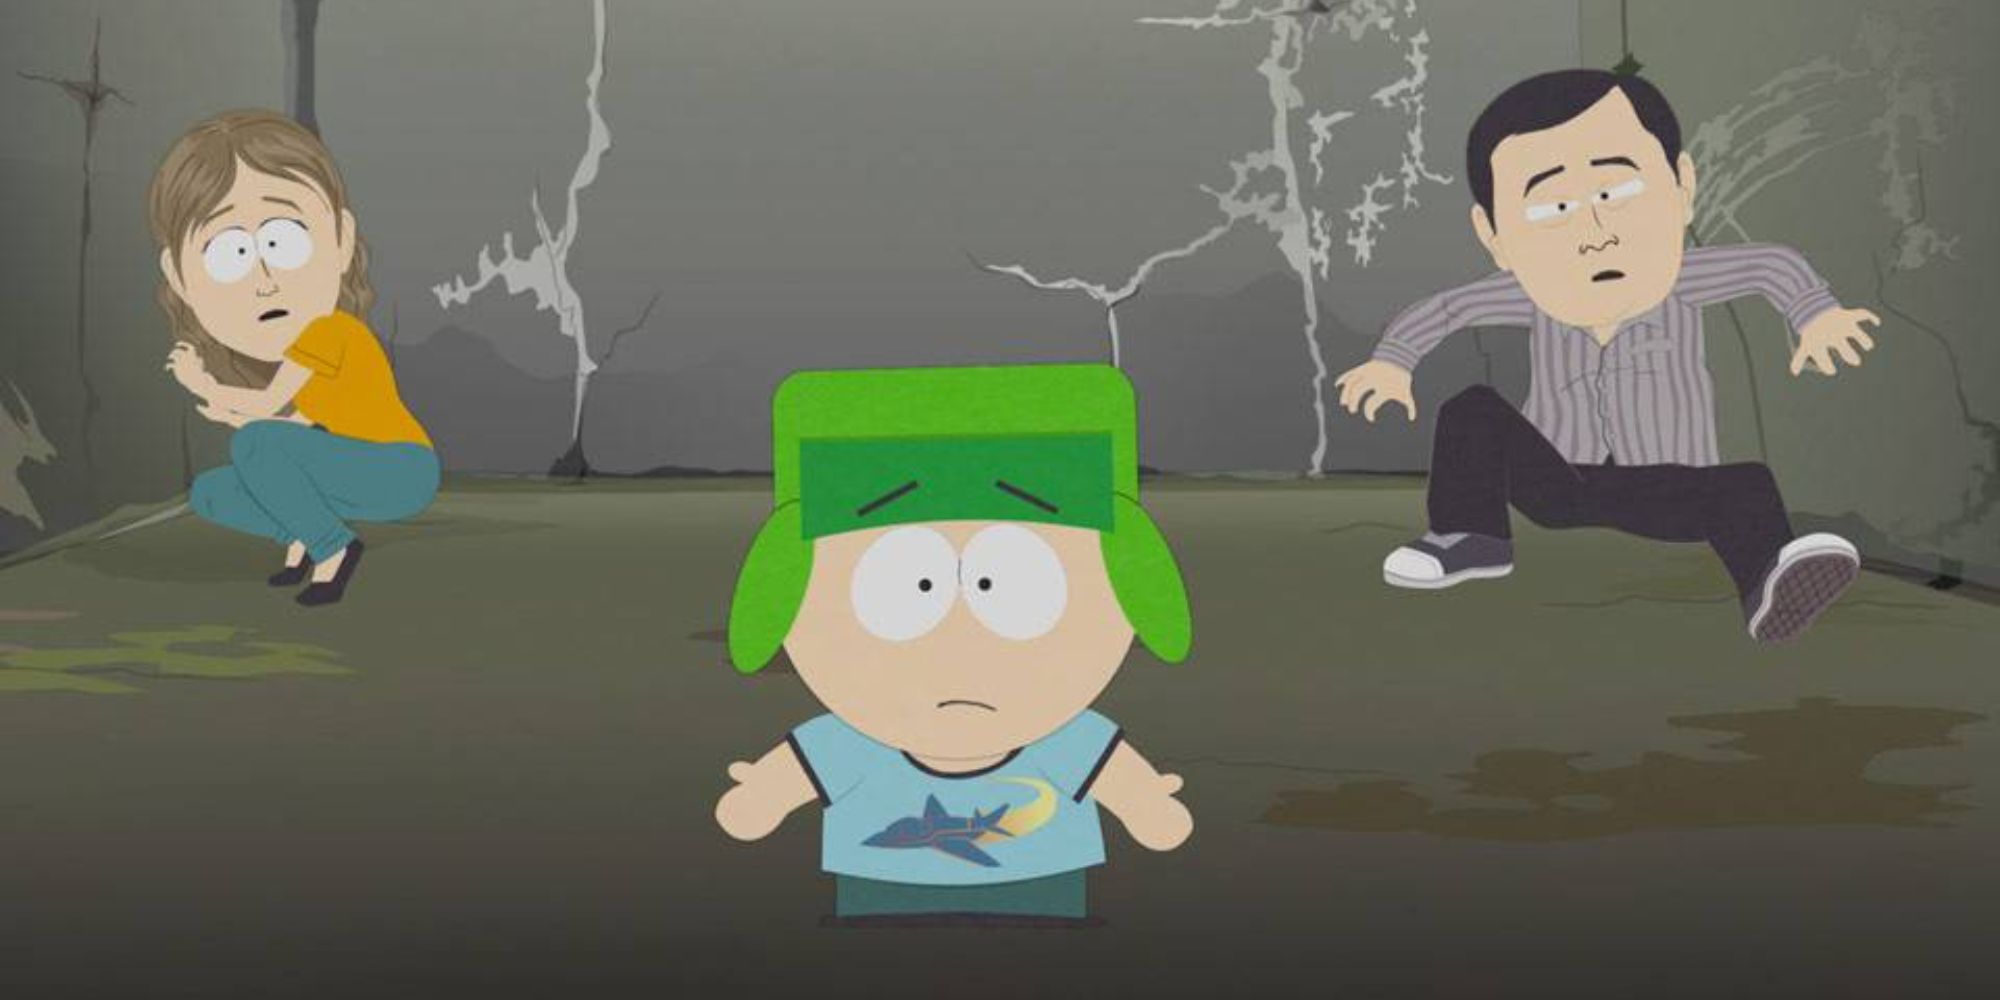 Kyle and two strangers sit in a prison cell in South Park